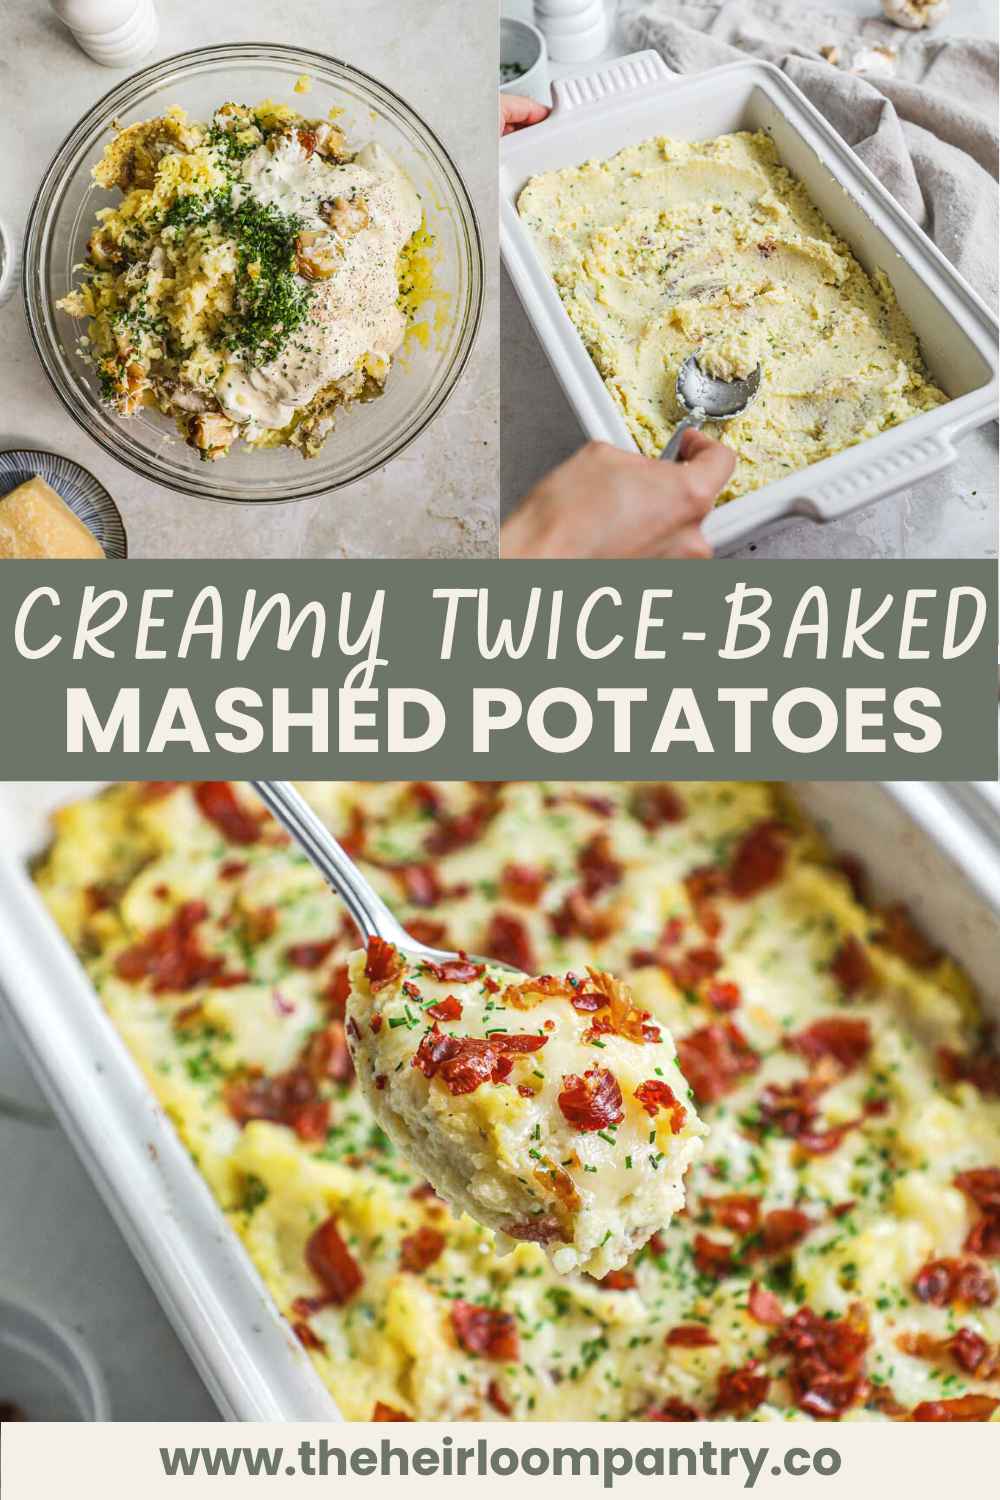 Creamy twice-baked potatoes with gruyere, chives, and crispy prosciutto Pinterest pin.